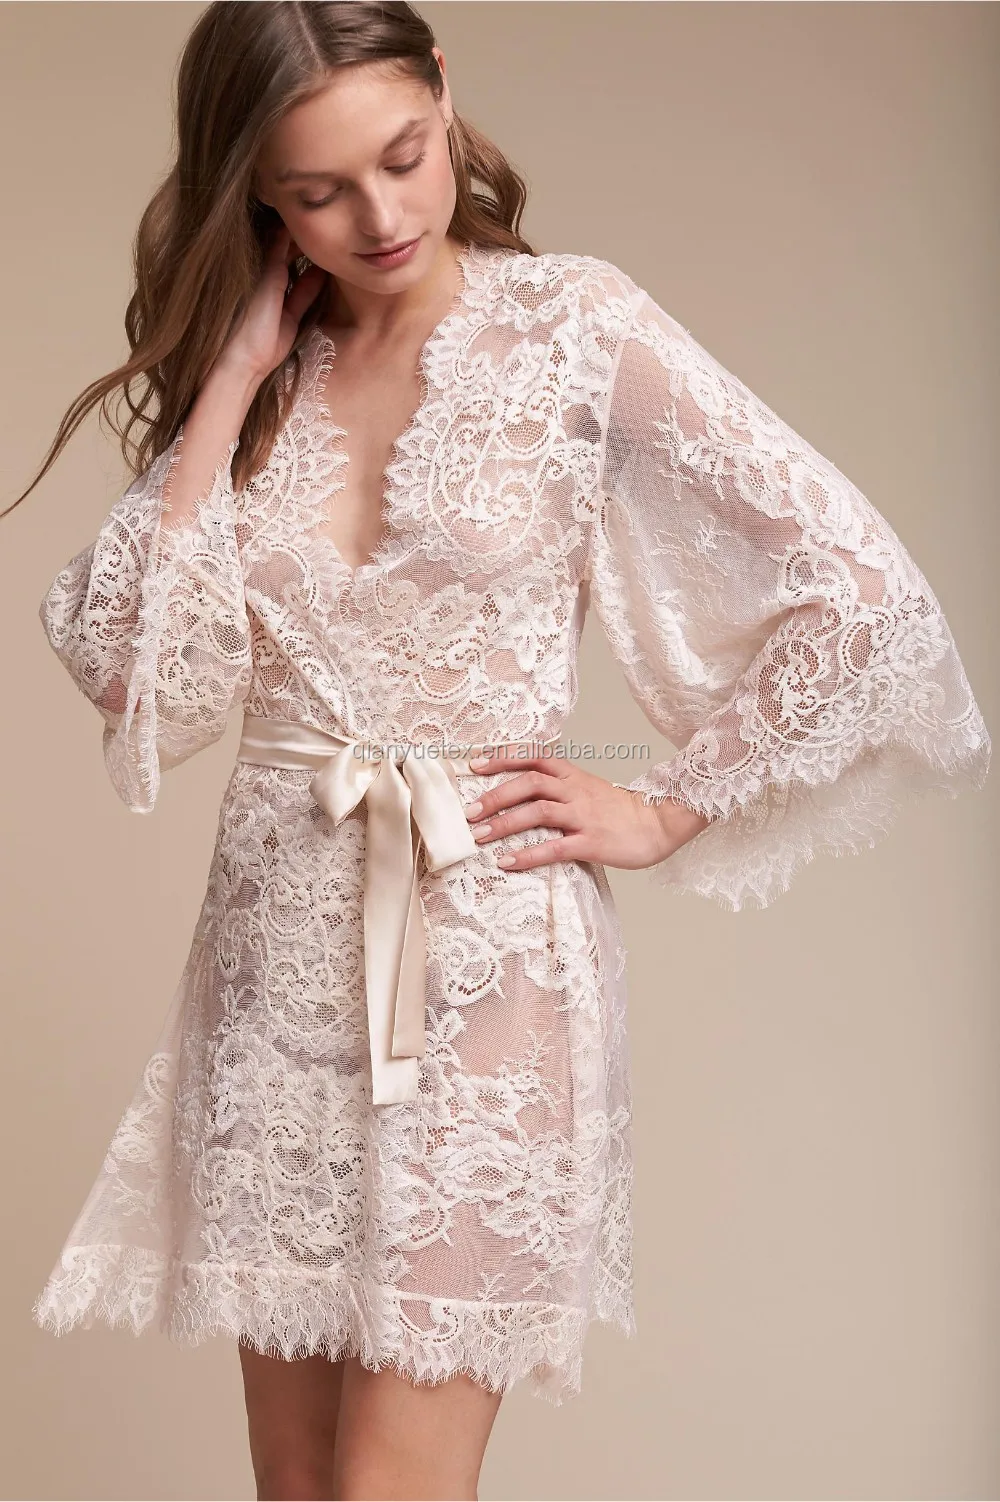 White Bridesmaid Sexy Short Lace Robe For Women Buy Sexy Robes Sexy